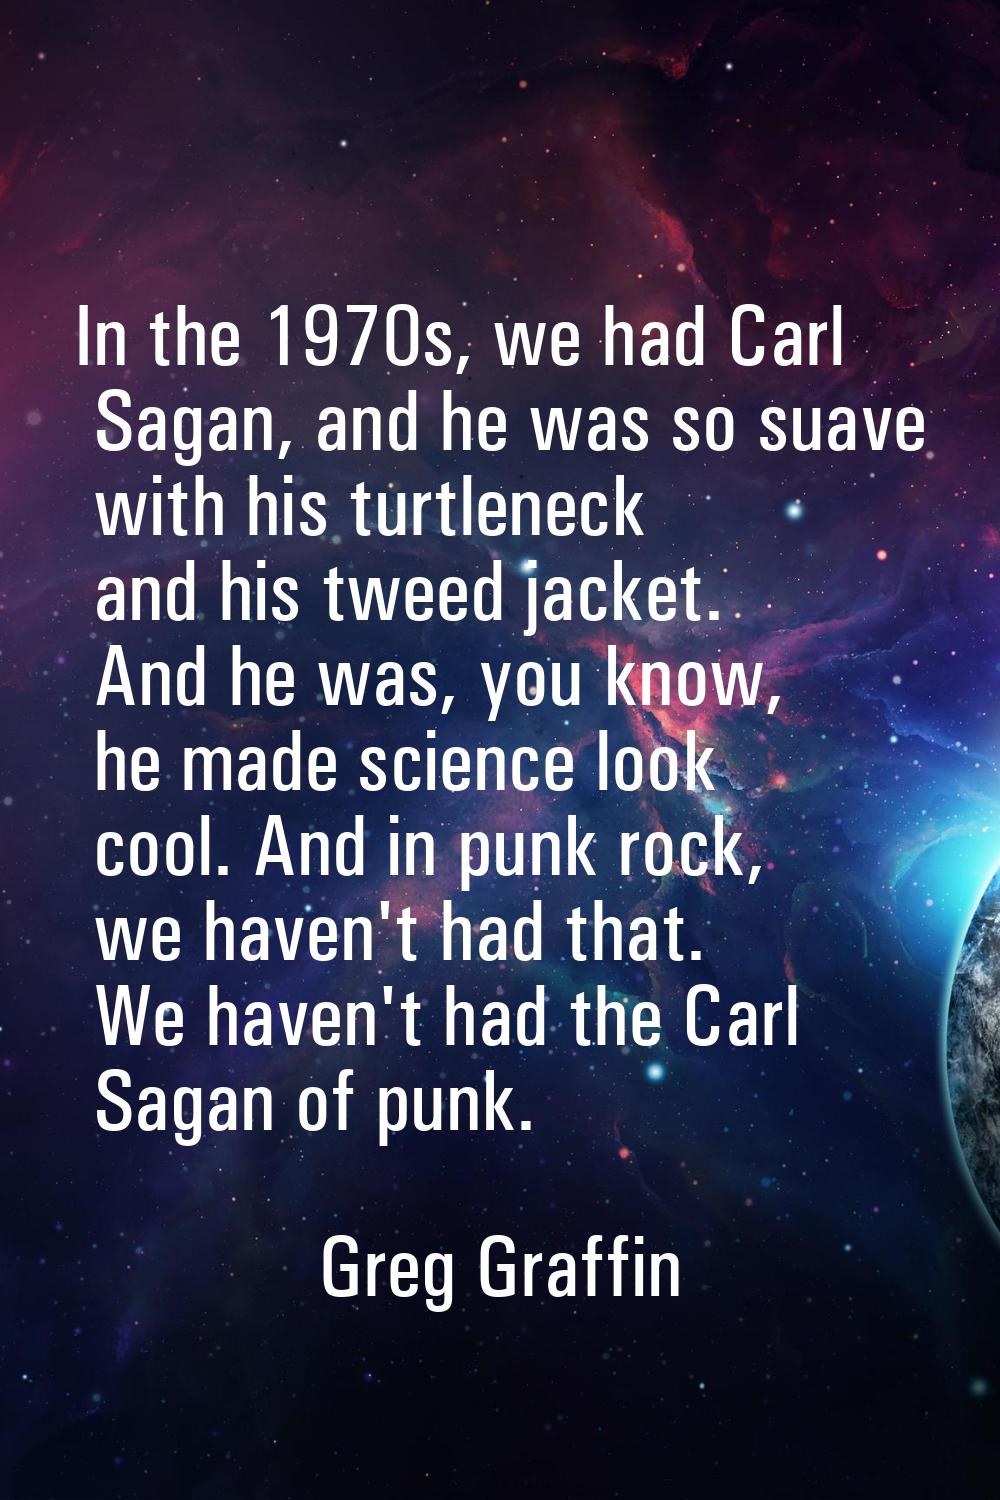 In the 1970s, we had Carl Sagan, and he was so suave with his turtleneck and his tweed jacket. And 